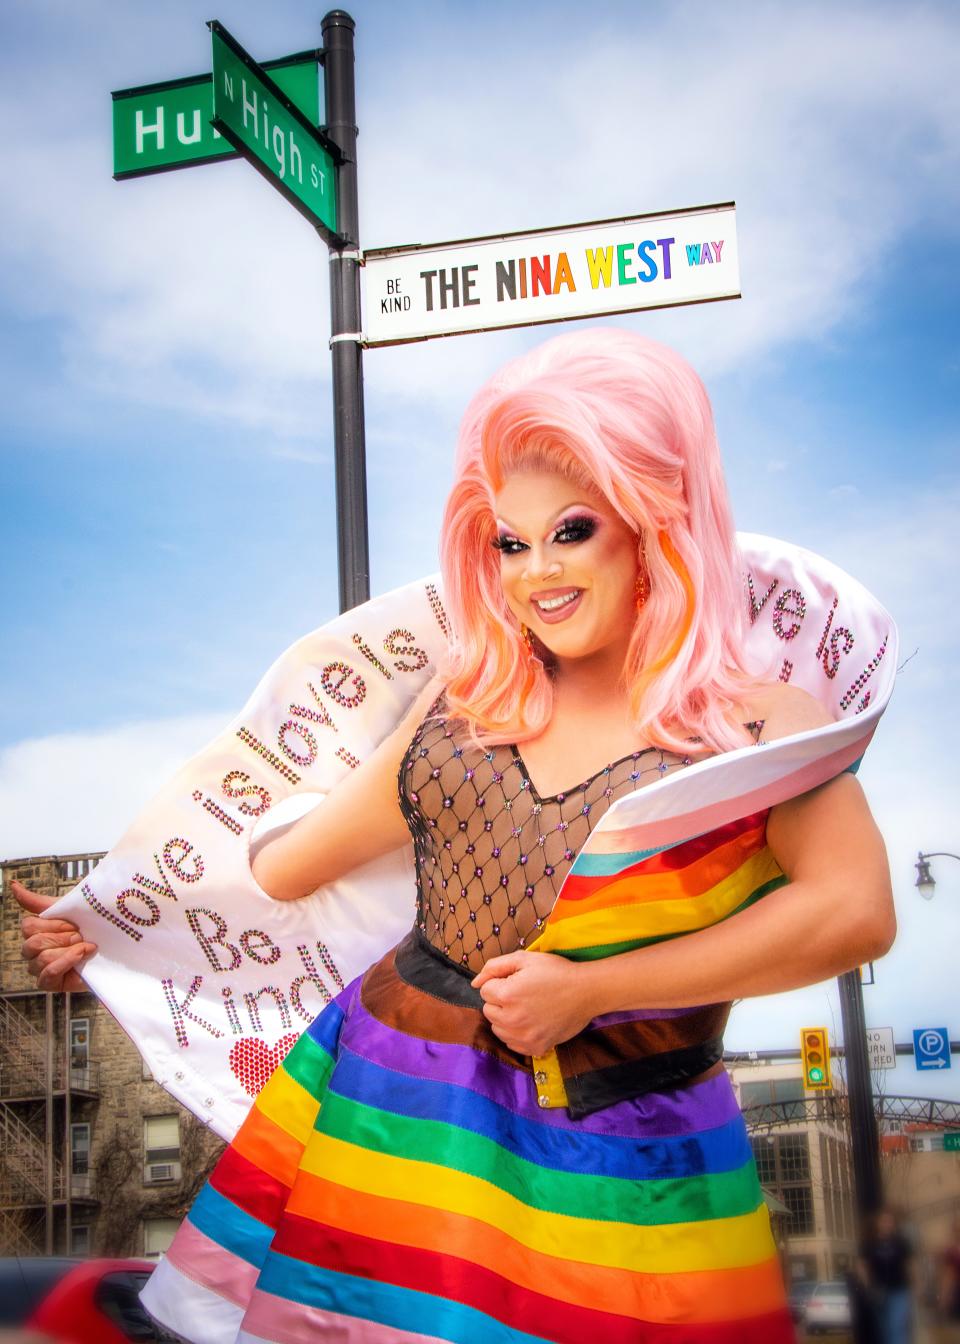 Nina West, a Columbus native and LGBTQ advocate, stands at the intersection of North High Street and Hull Alley — renamed Nina West Way in 2019.